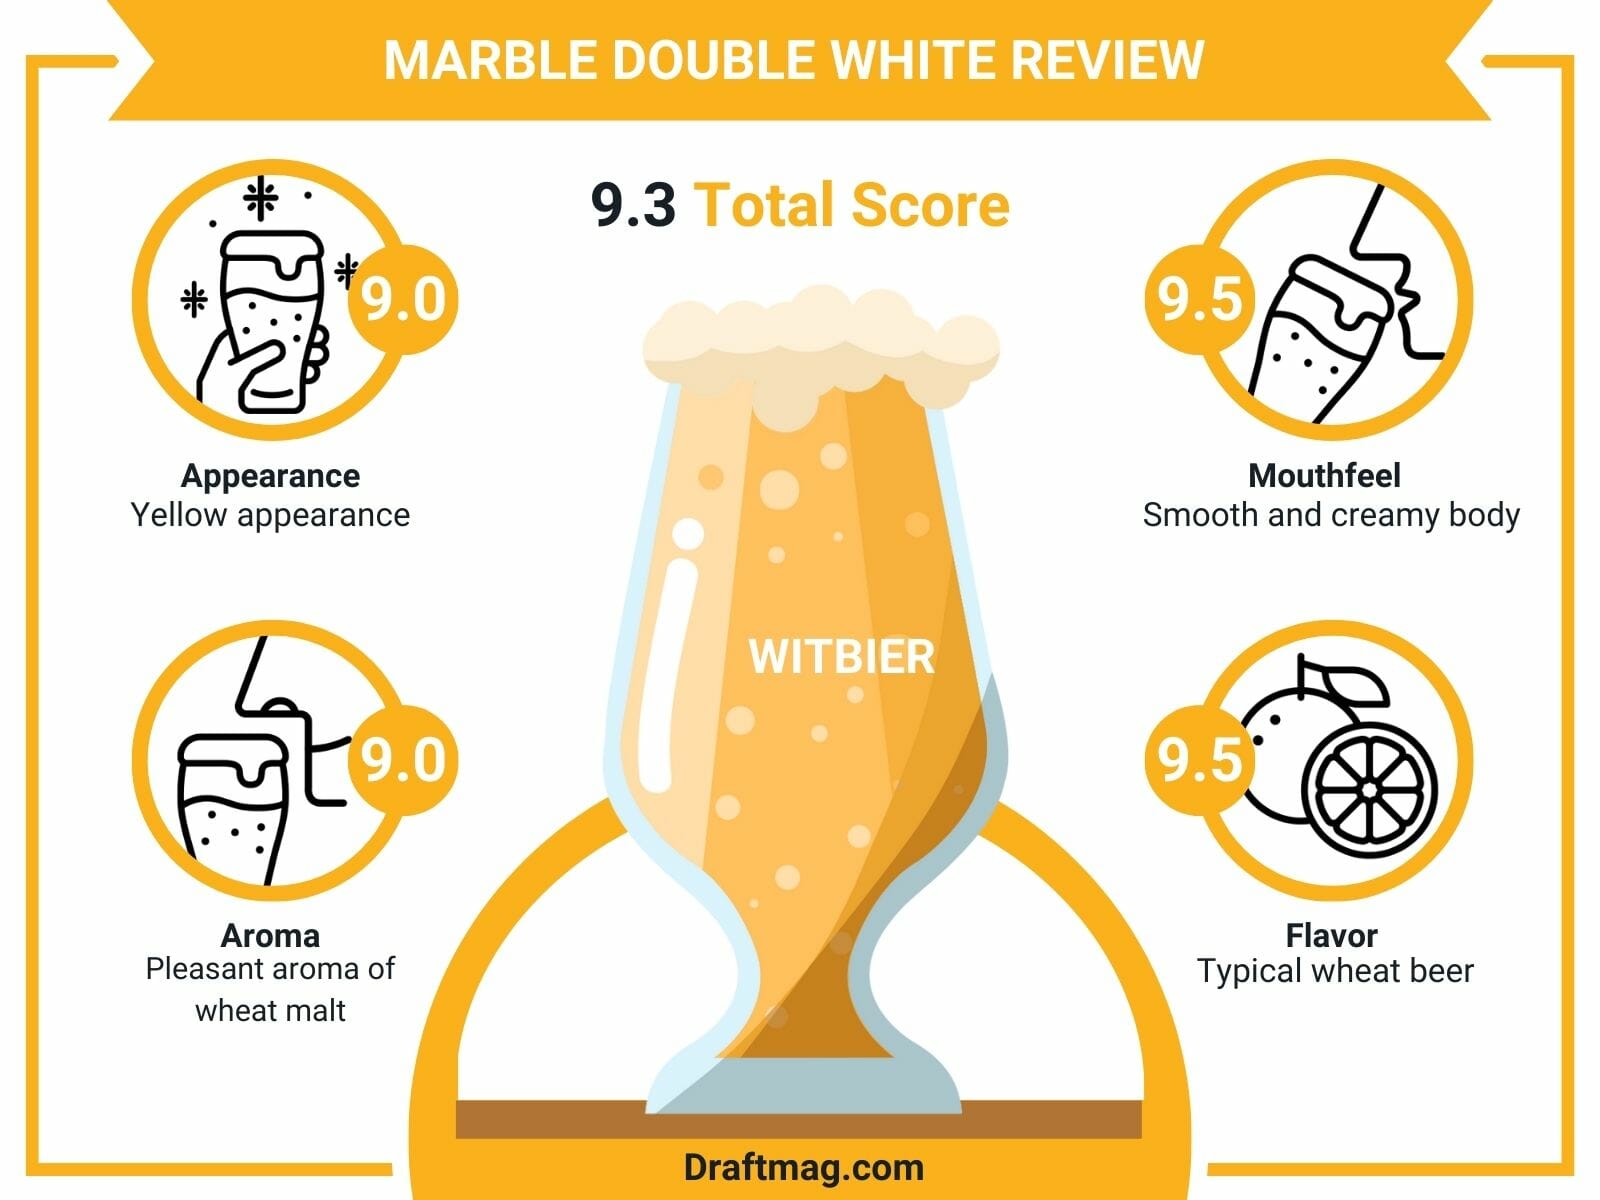 Marble Double White Review Infographic